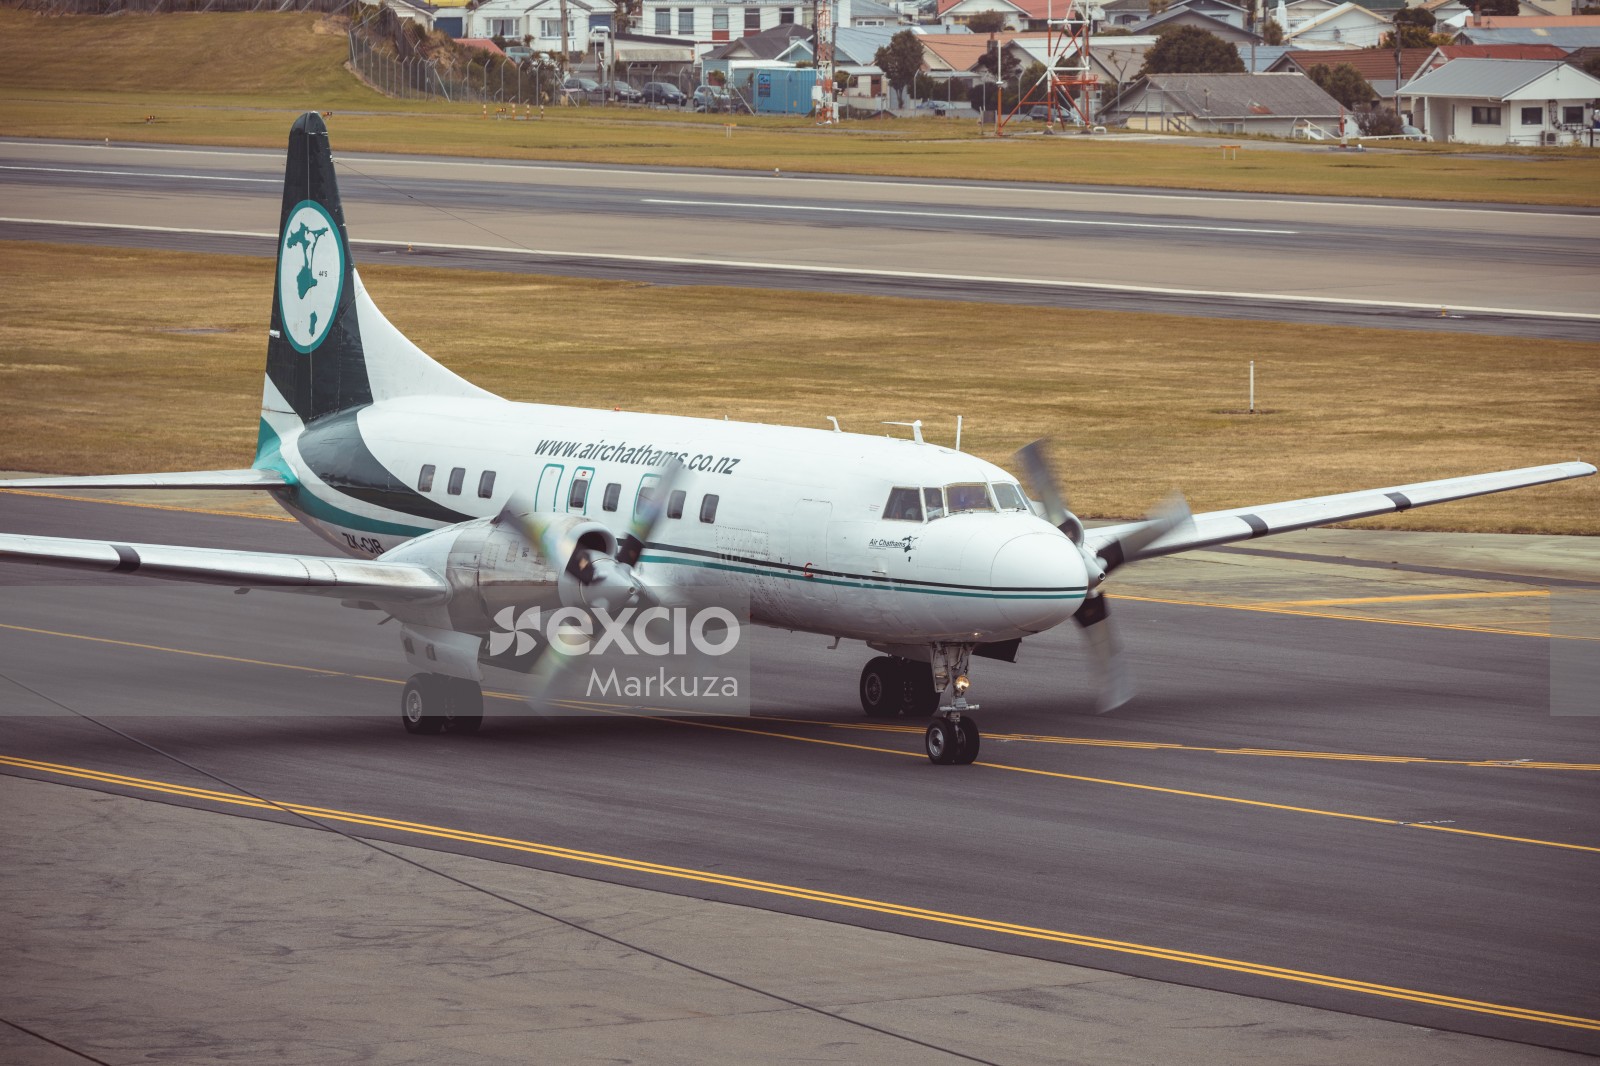 AIR Chathams plane readying for take off